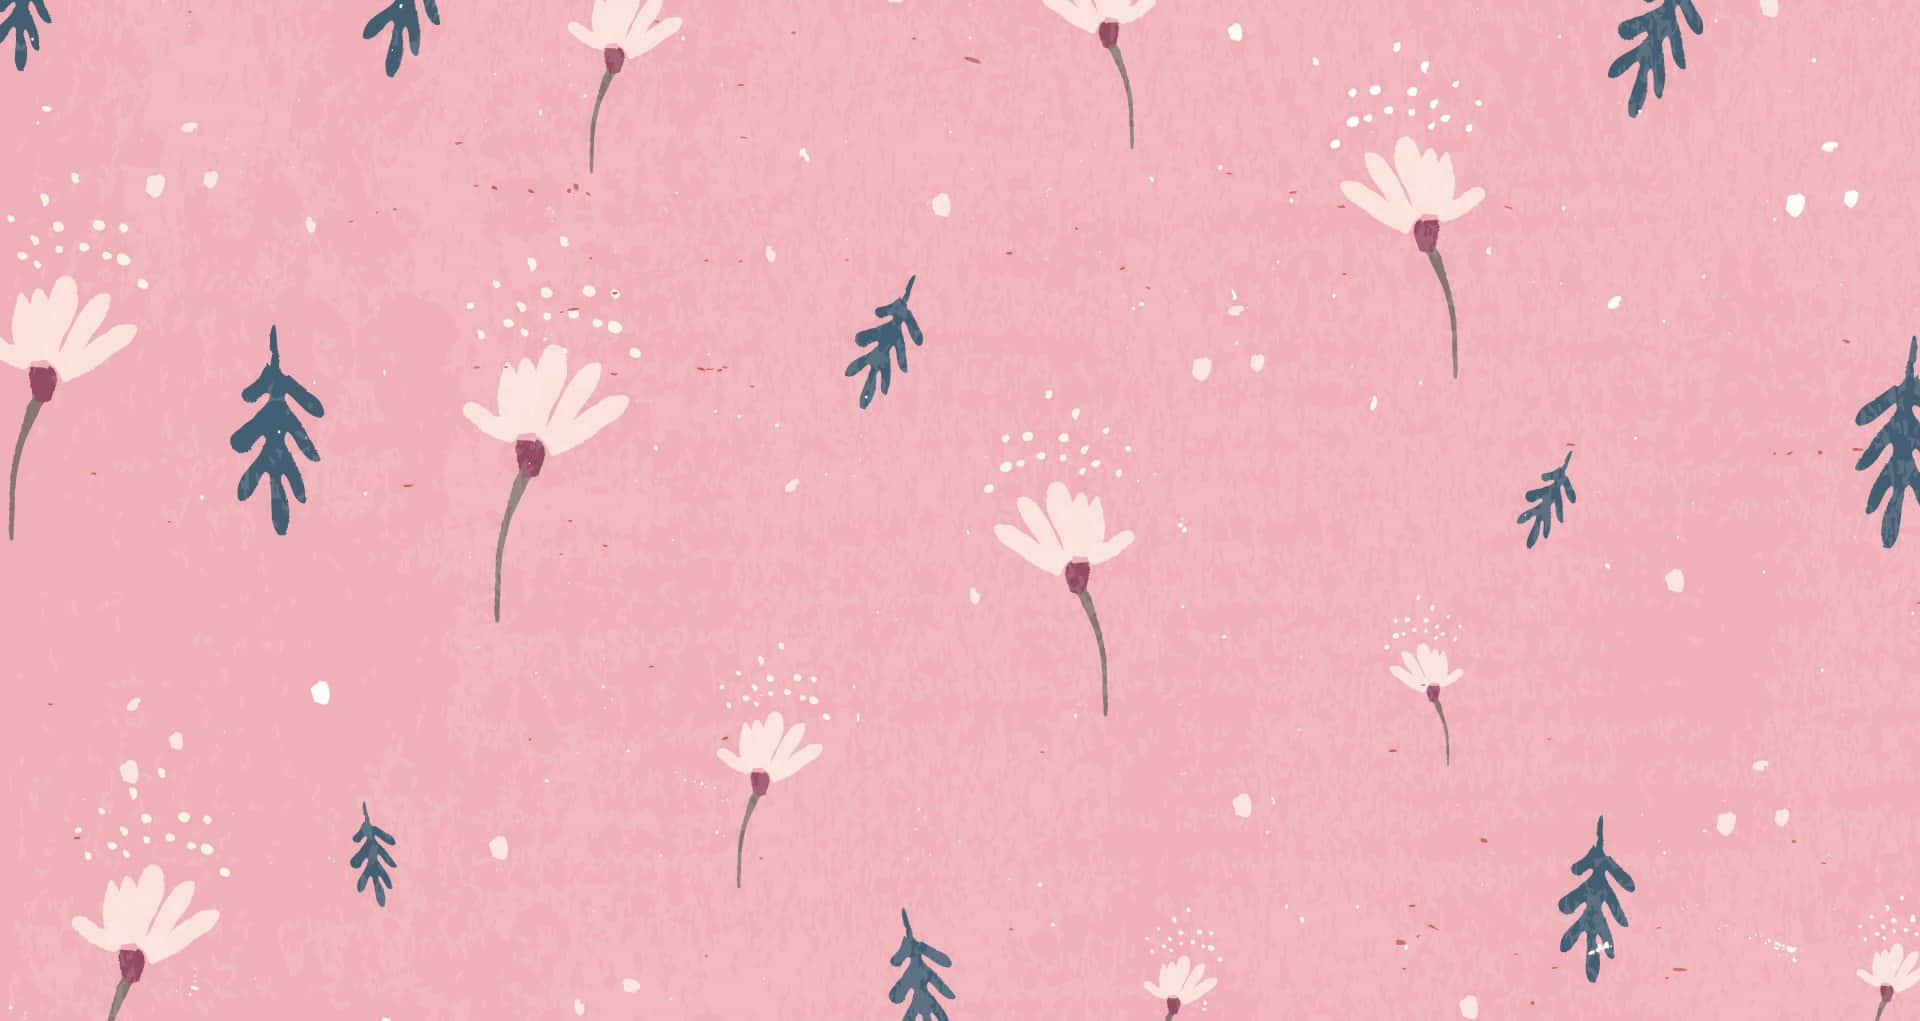 Adorable Kawaii Flower Bringing Joy and Vibrance to Your Screen Wallpaper